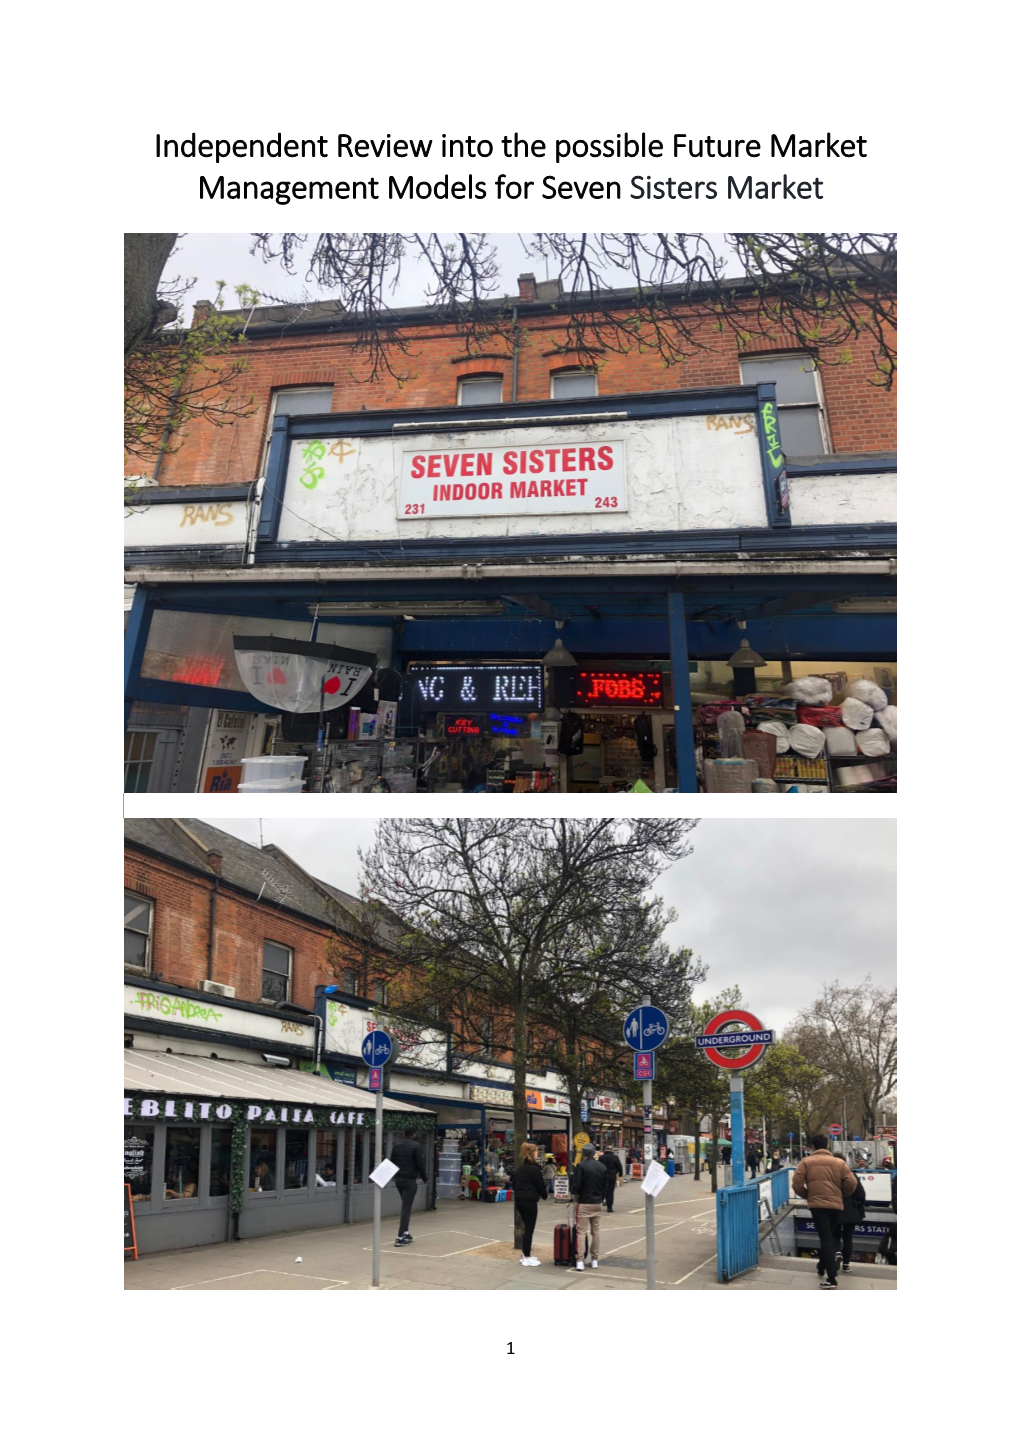 Independent Review Into the Possible Future Market Management Models for Seven Sisters Market